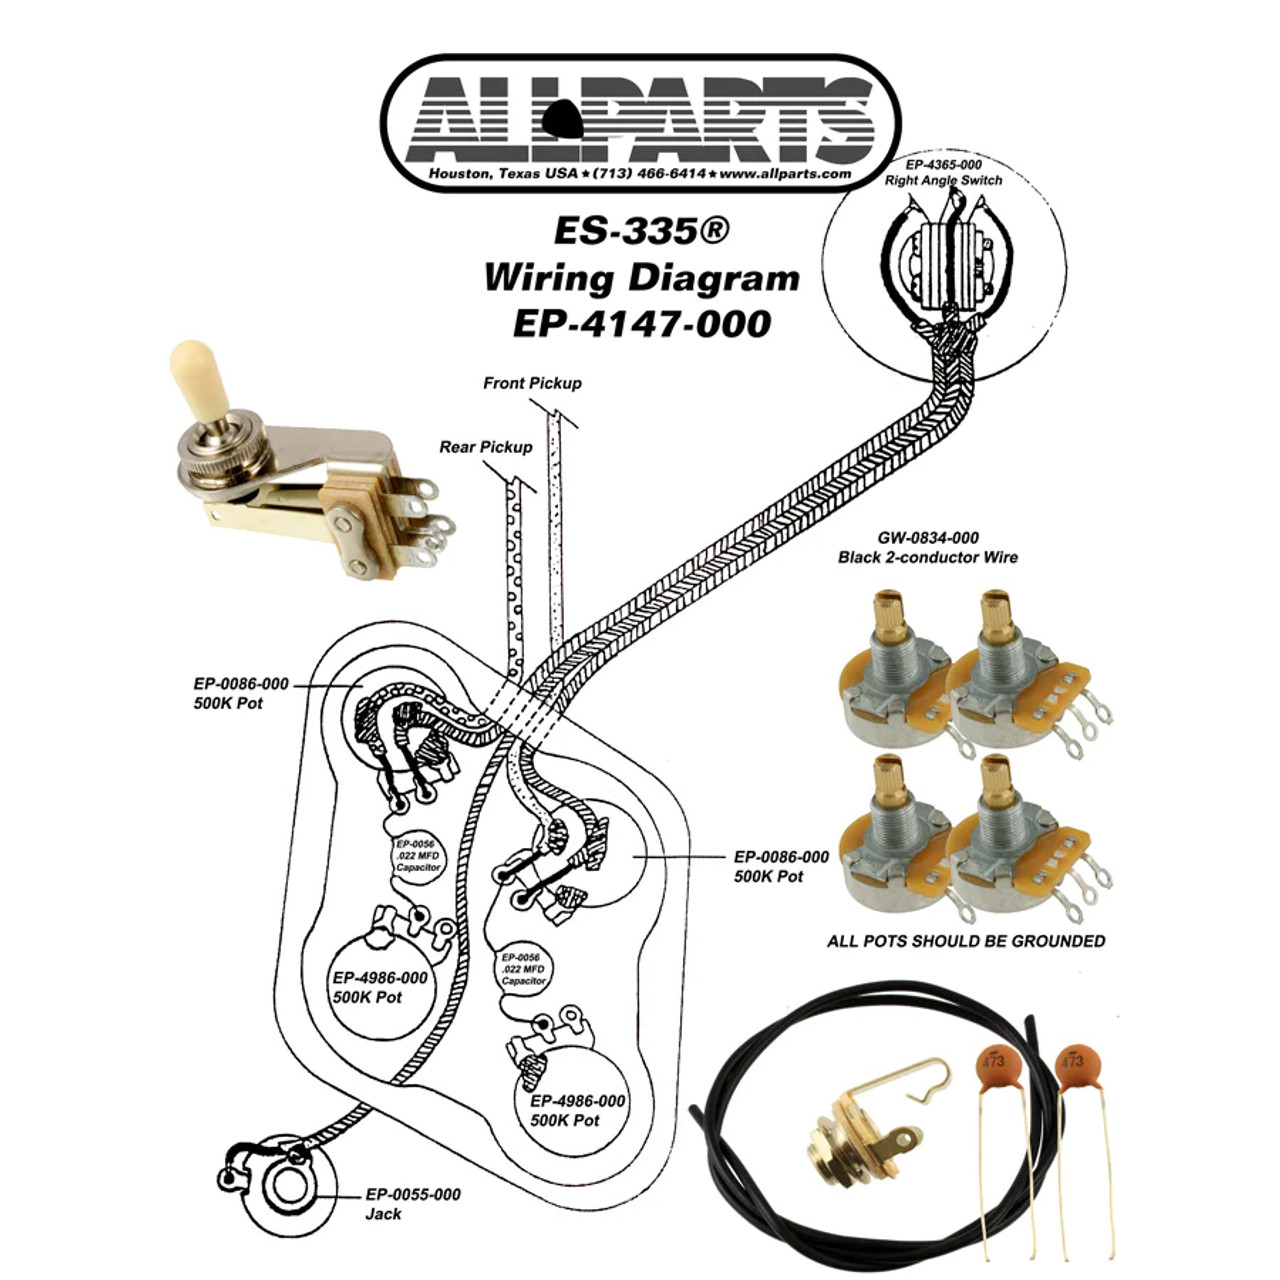 Wiring Kit for Gibson ES-335